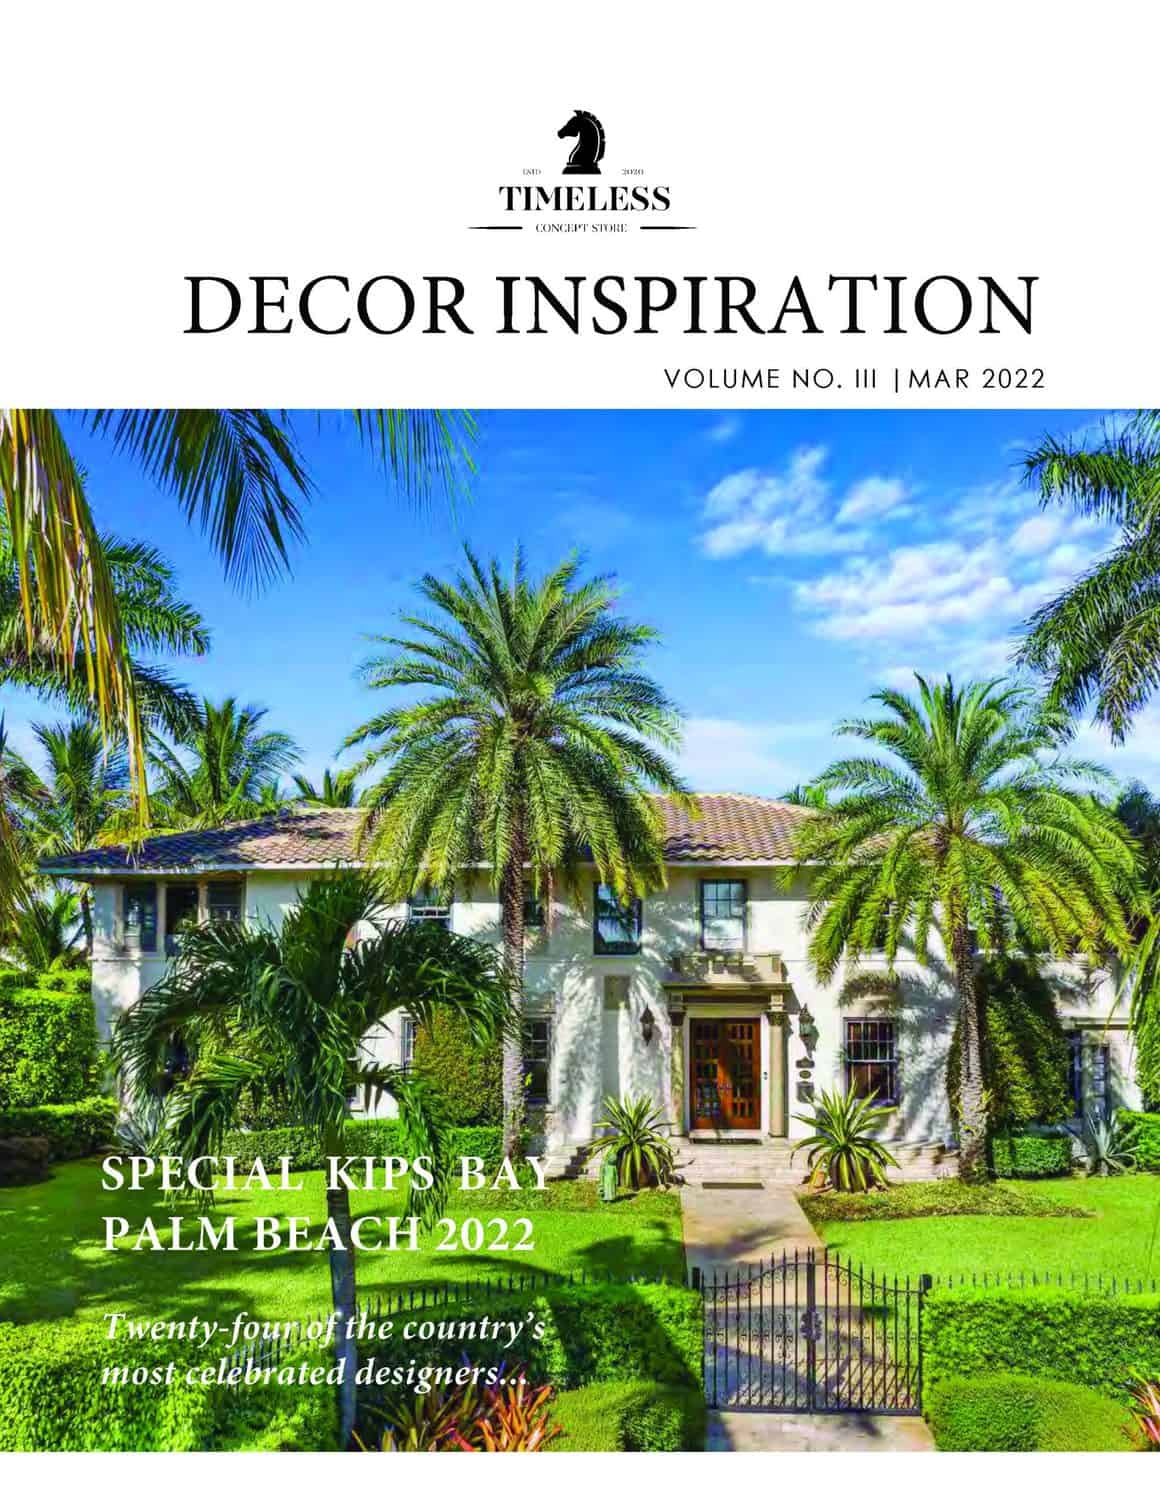 Timeless Decor Inspiration March 2022 Cover Image